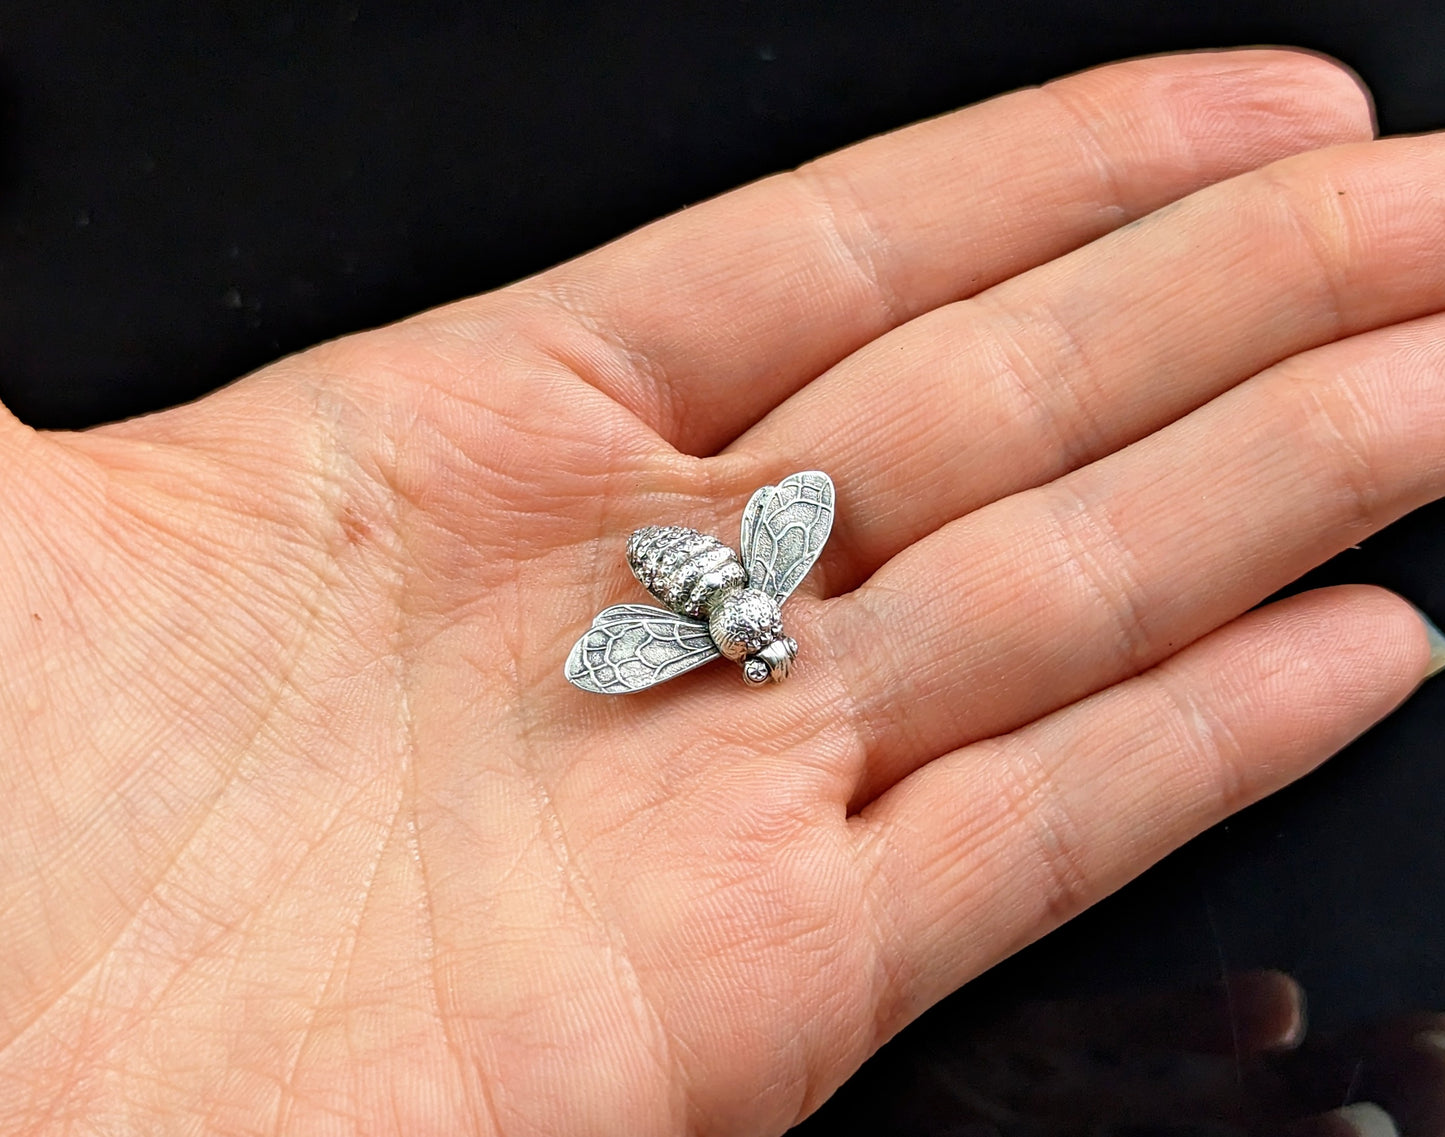 Antique silver Bee brooch, Victorian sterling silver insect pin